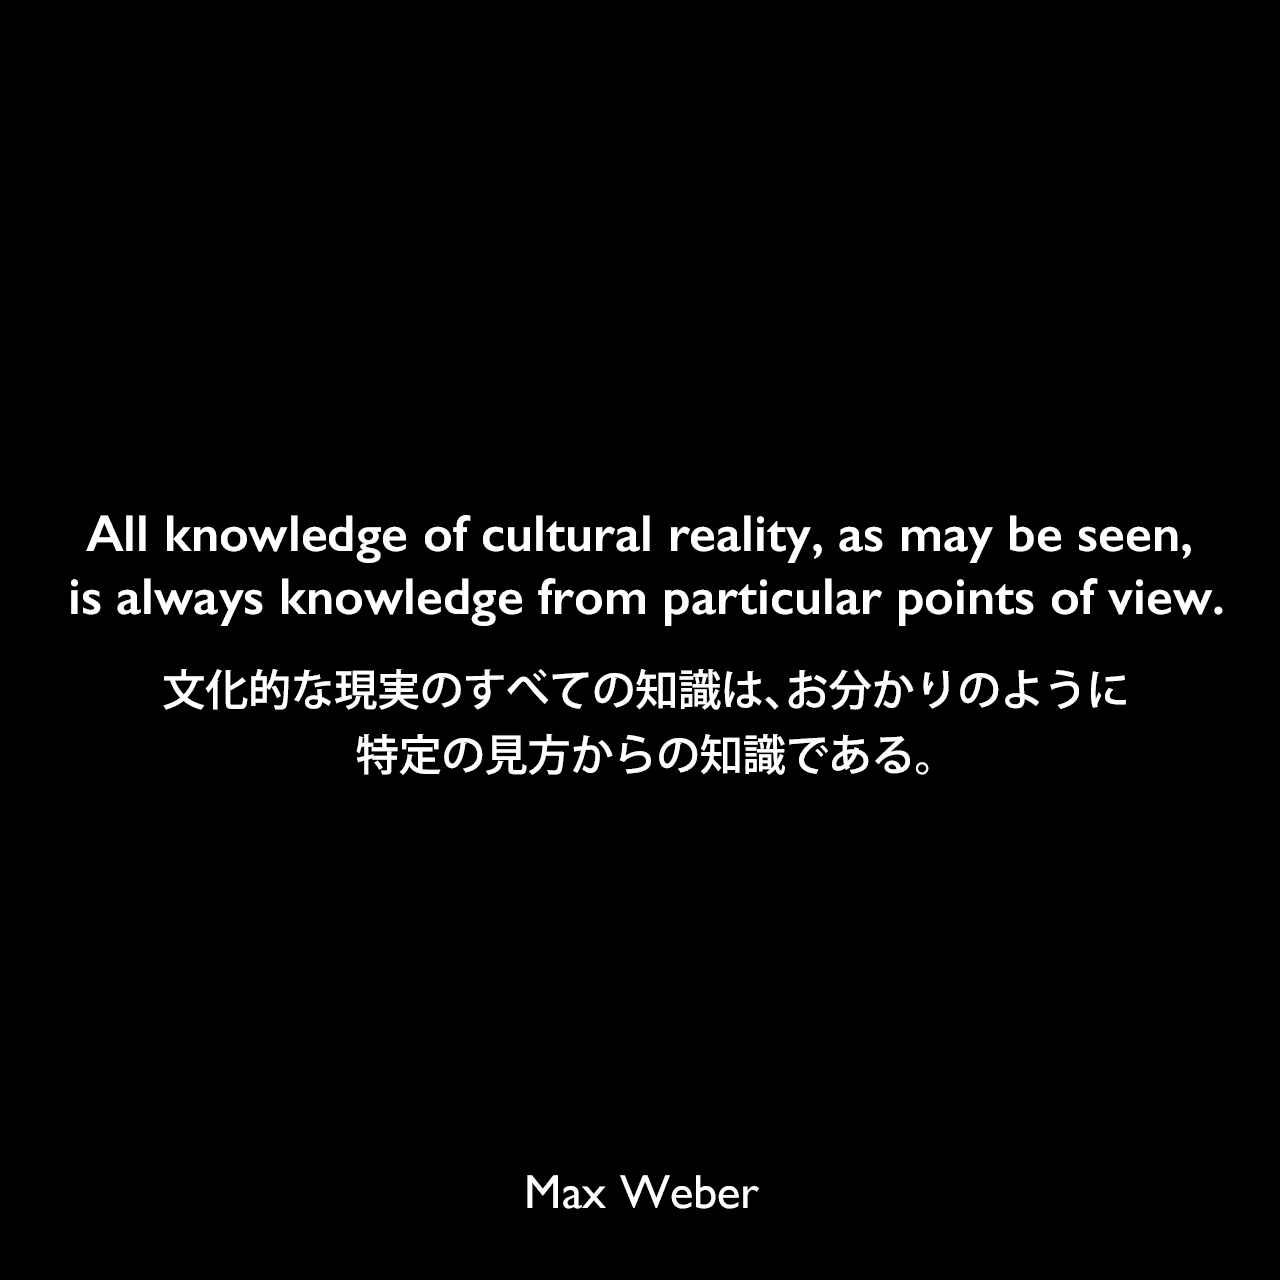 All knowledge of cultural reality, as may be seen, is always knowledge from particular points of view.文化的な現実のすべての知識は、お分かりのように、特定の見方からの知識である。Max Weber